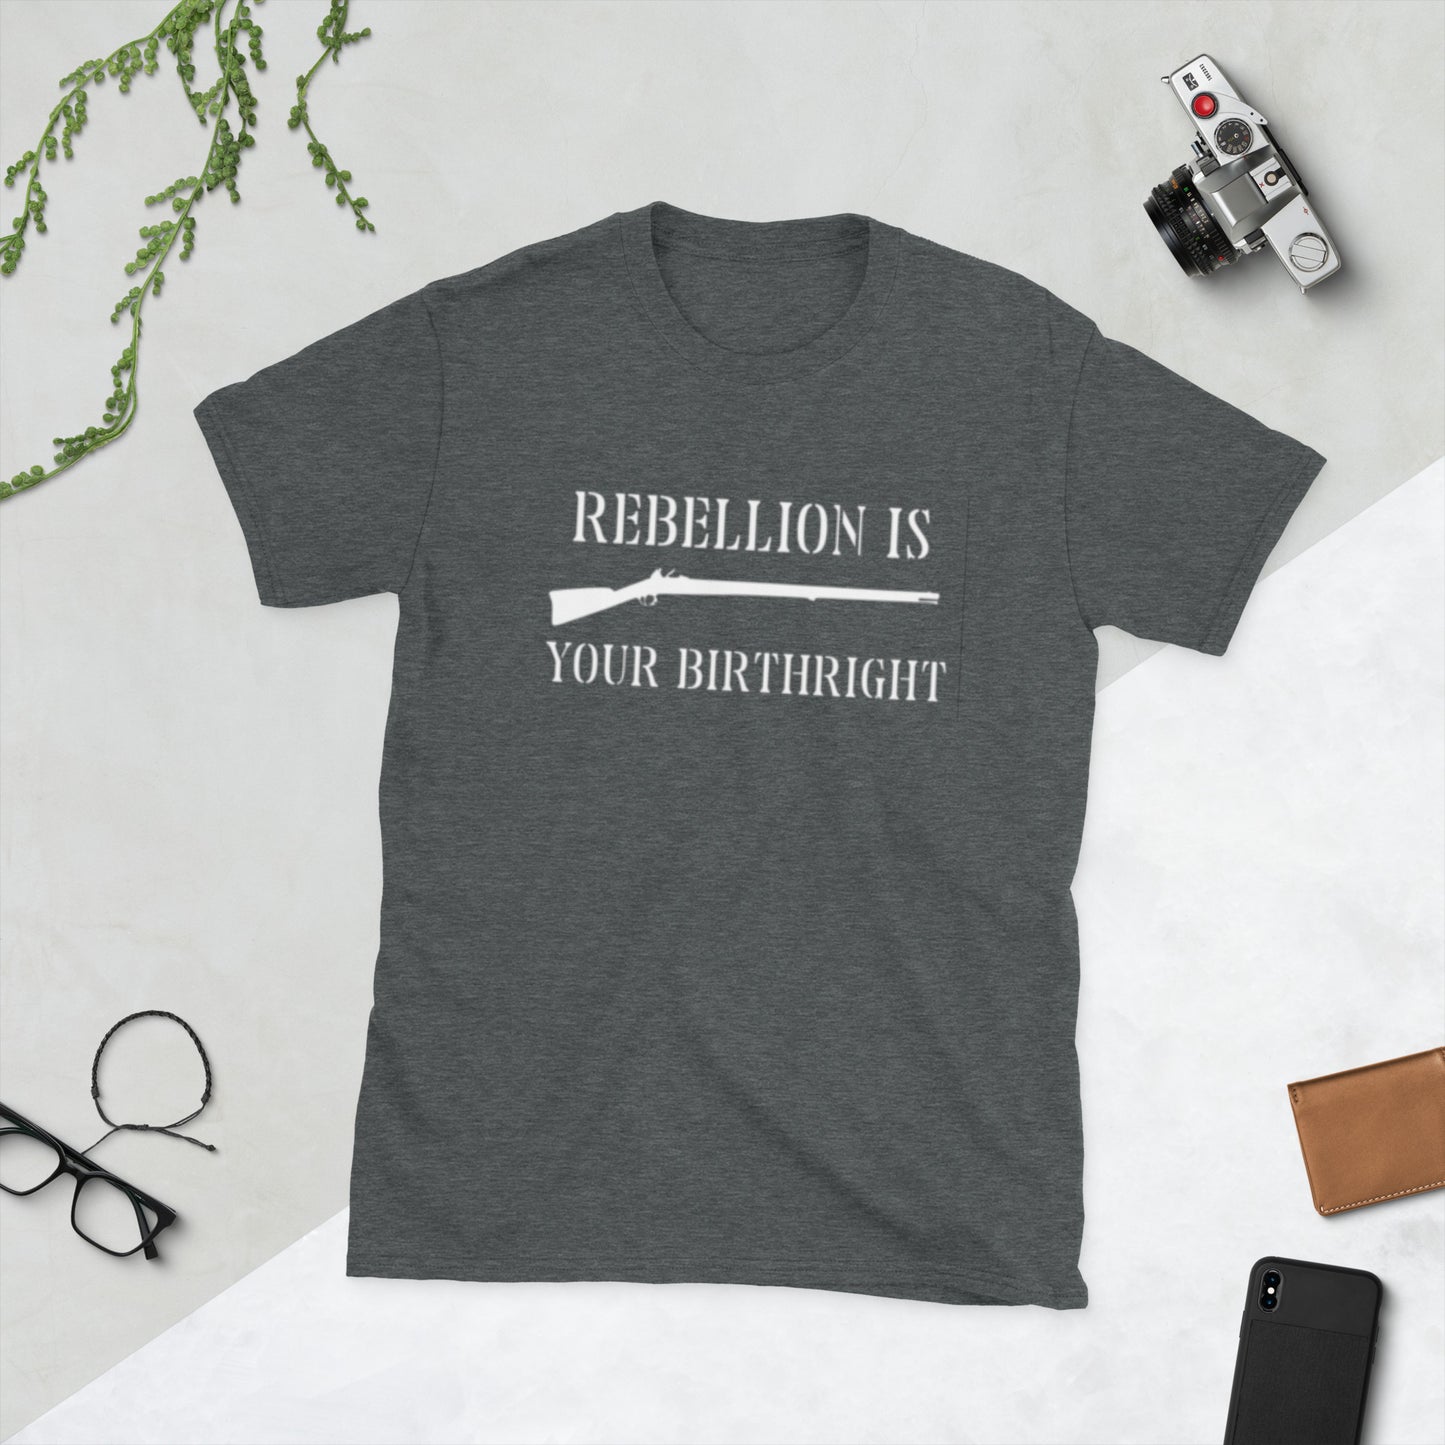 Rebellion is Your Birthright - Musket - Short-Sleeve Unisex T-Shirt